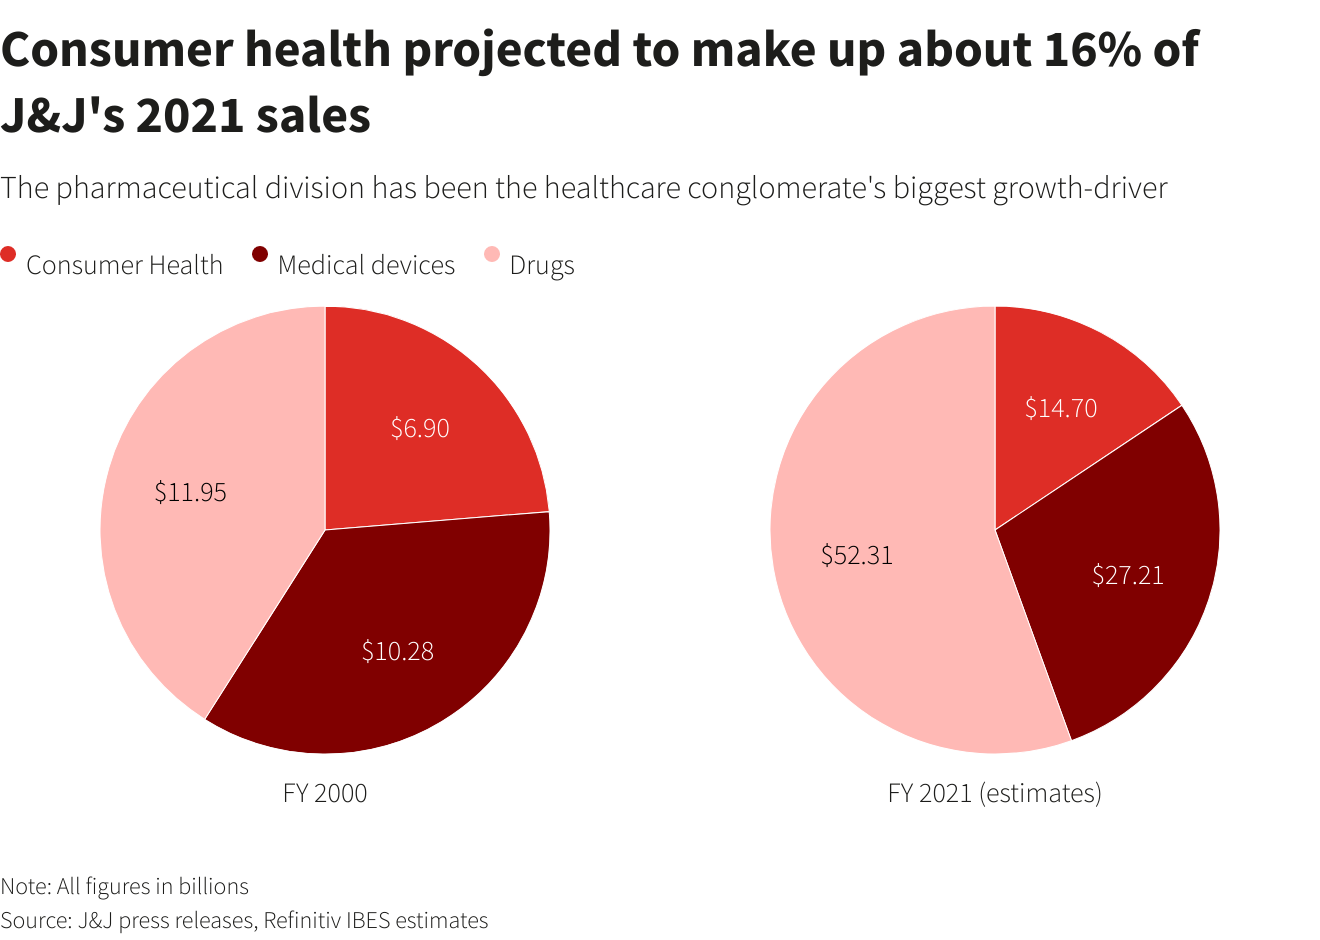 Consumer health projected to make up about 16% of J&J's 2021 sales